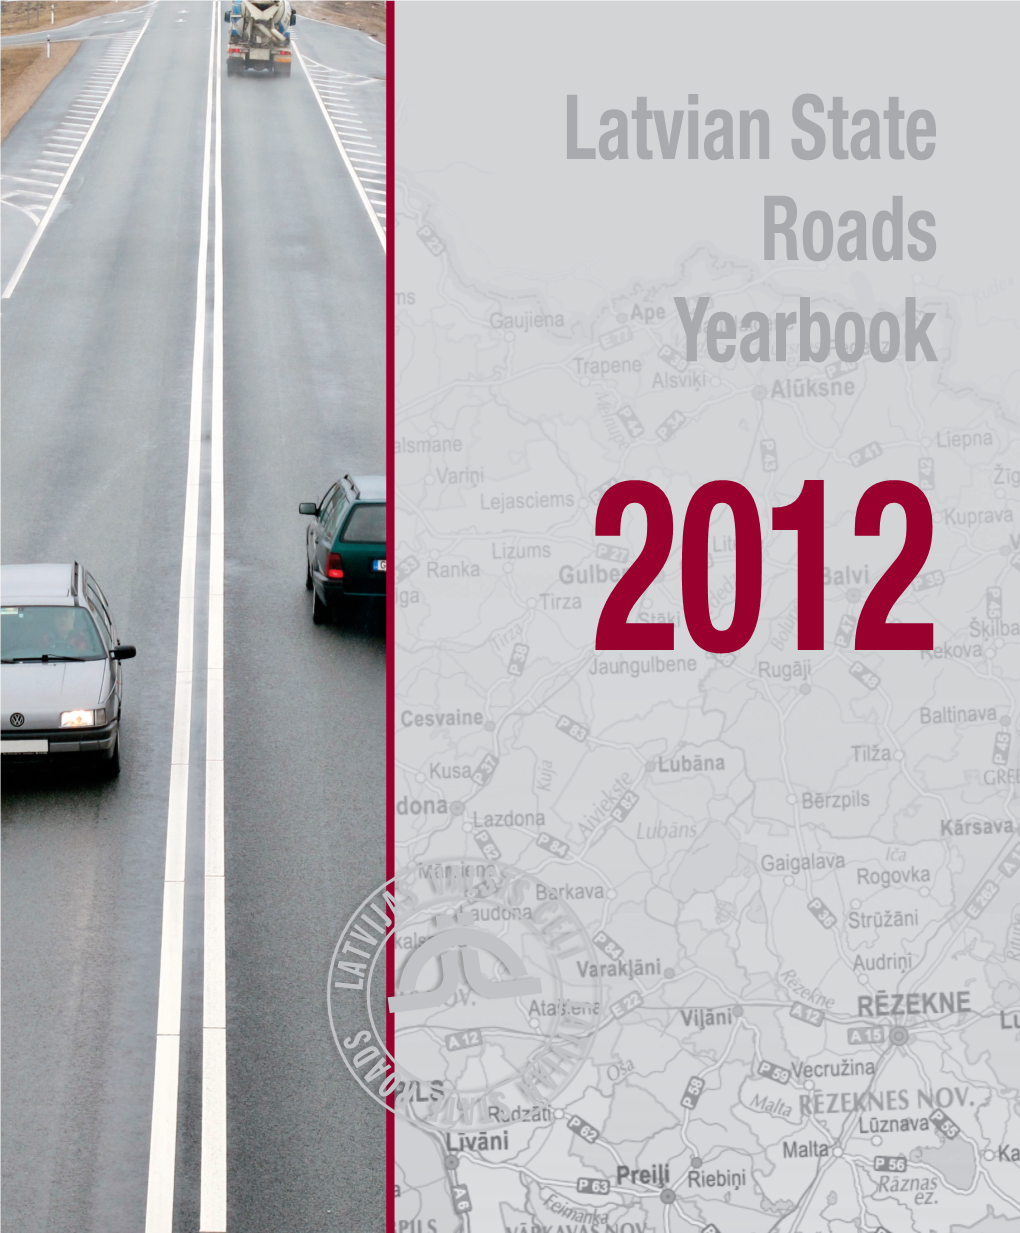 Latvian State Roads Yearbook